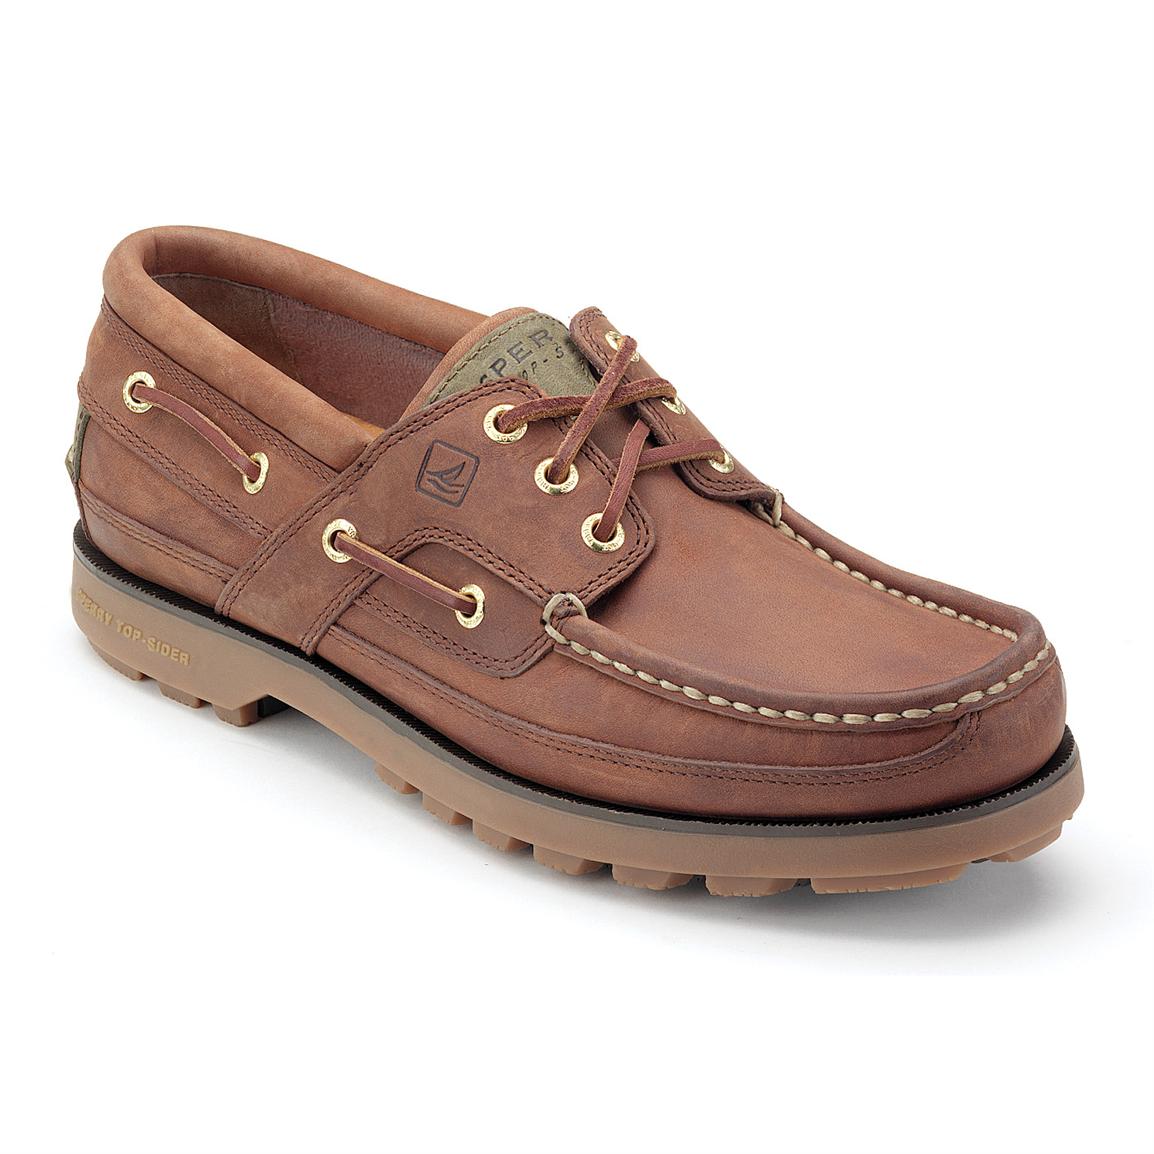 Sperry Mako 3-Eye Lug Sole Boat Shoes - 112338, Boat & Water Shoes at Sportsman's Guide